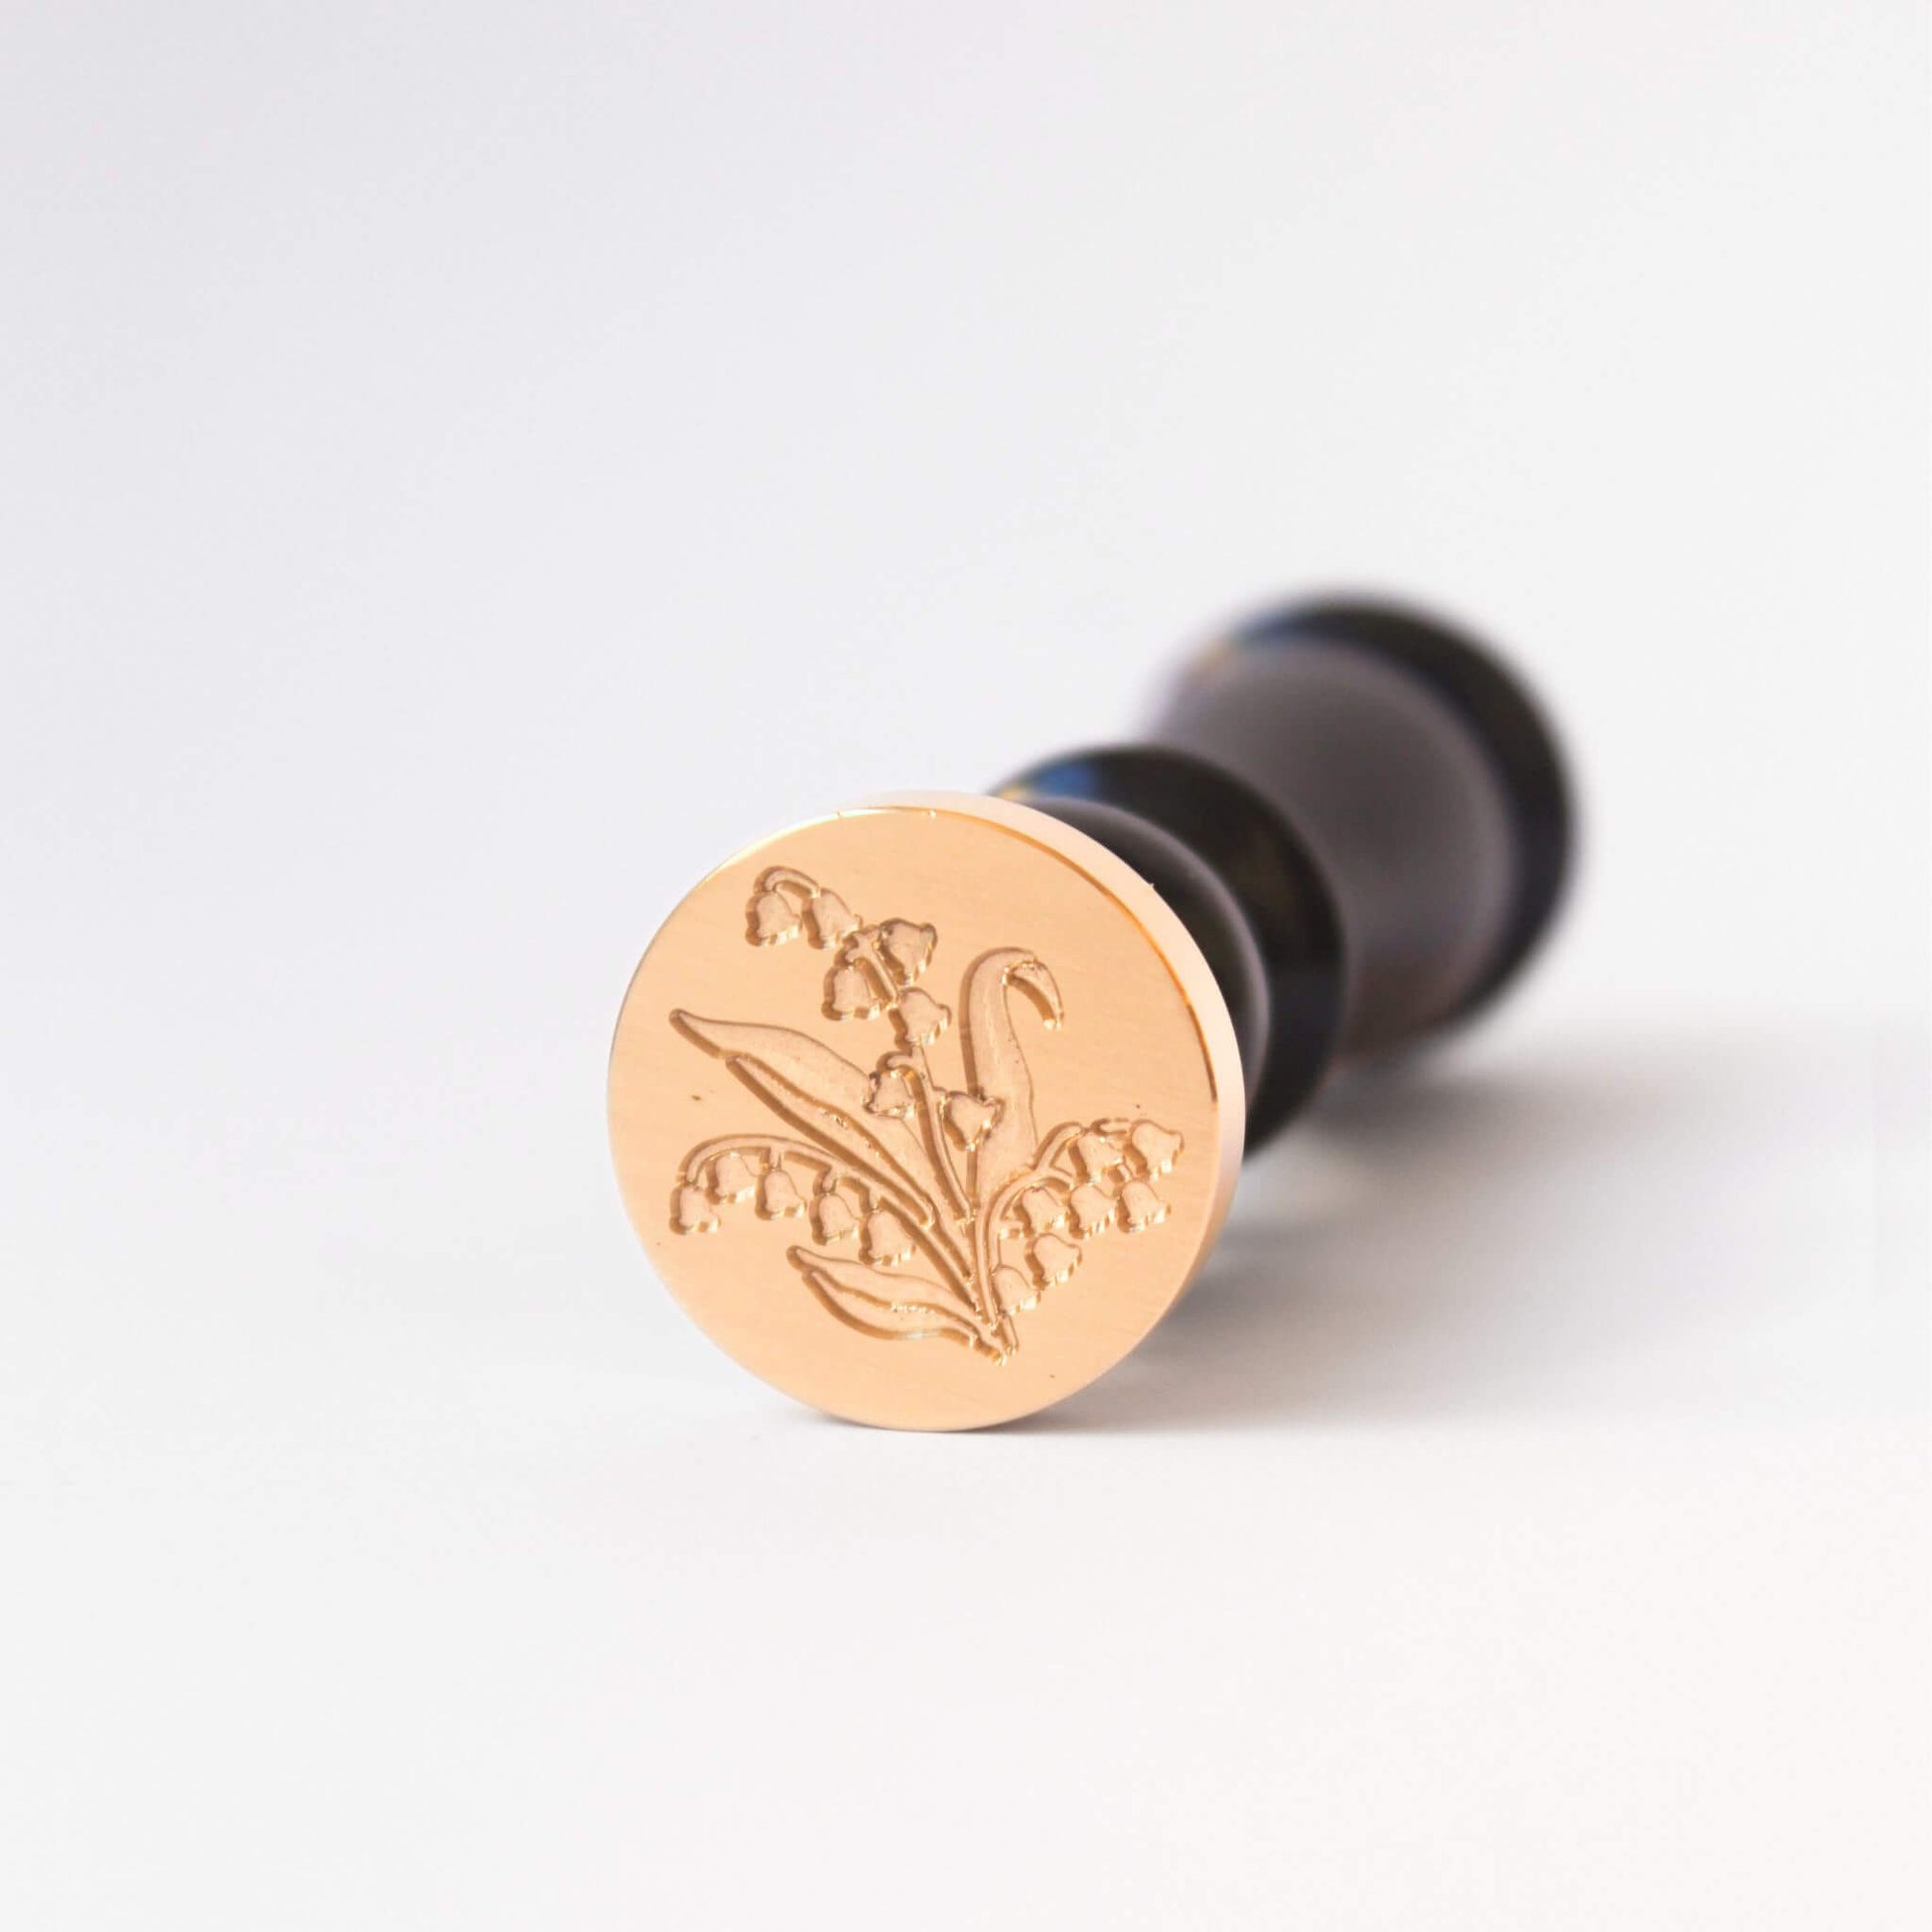 Brass wax seal head with engaving of Lily of the Valley flower and black wood wax seal stamp handle attached